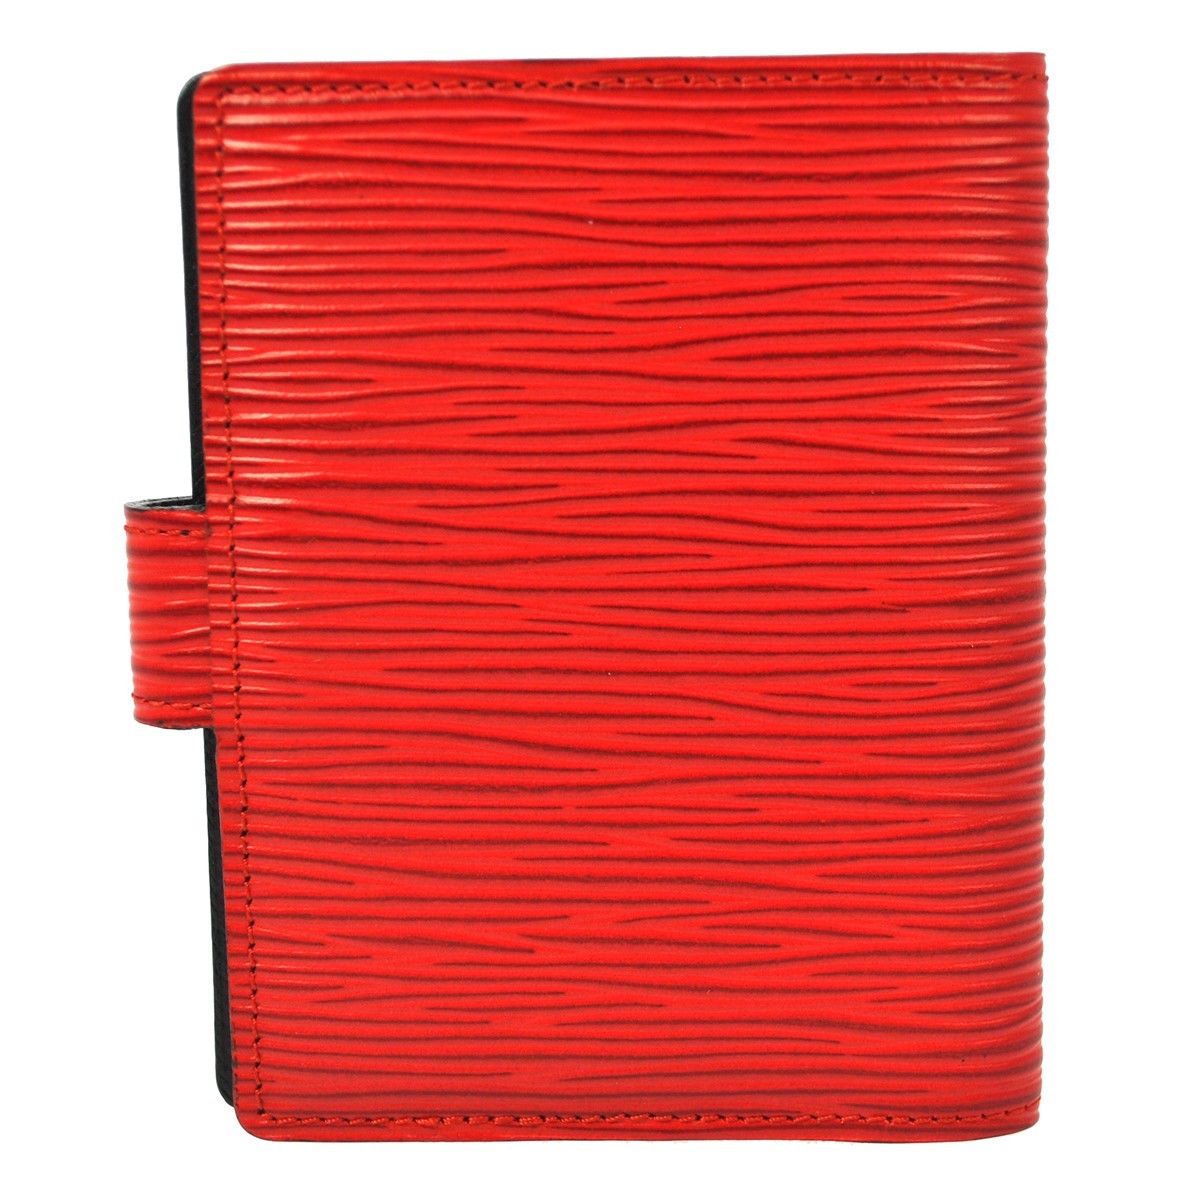 Louis Vuitton Vintage Card Holder Red - $60 (73% Off Retail) - From Maleah